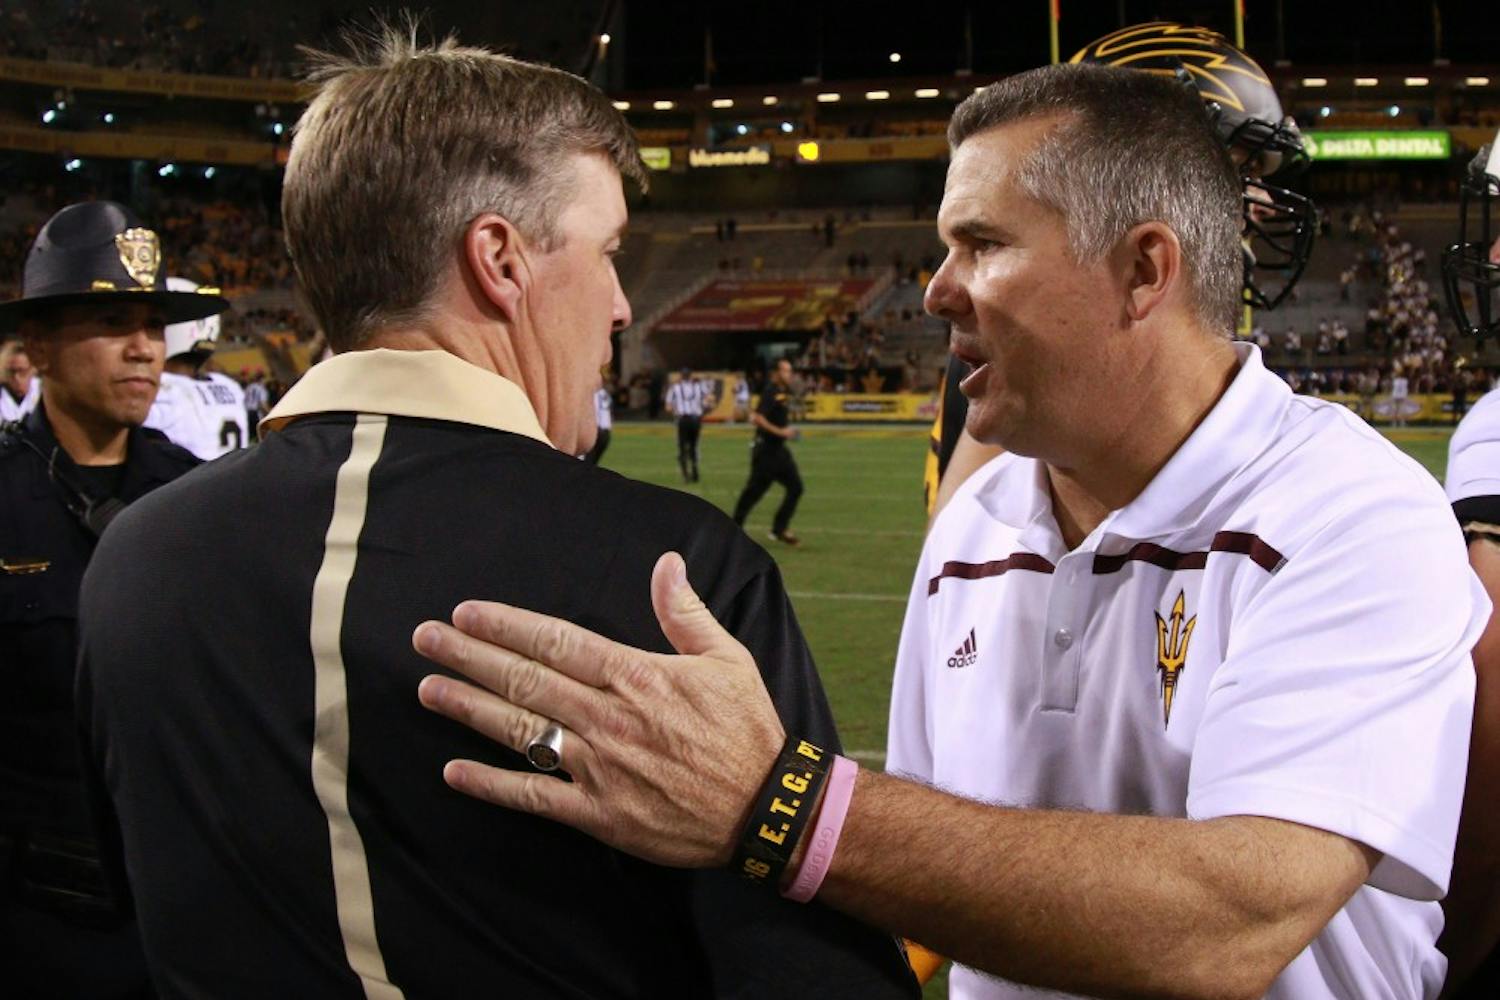 Head coach Todd Graham shakes hands with Colorado head coach Mike MacIntyre after the game against Colorado on Saturday, Oct. 10, 2015, at Sun Devil Stadium in Tempe. The Sun Devils defeated the Buffaloes 48-23.